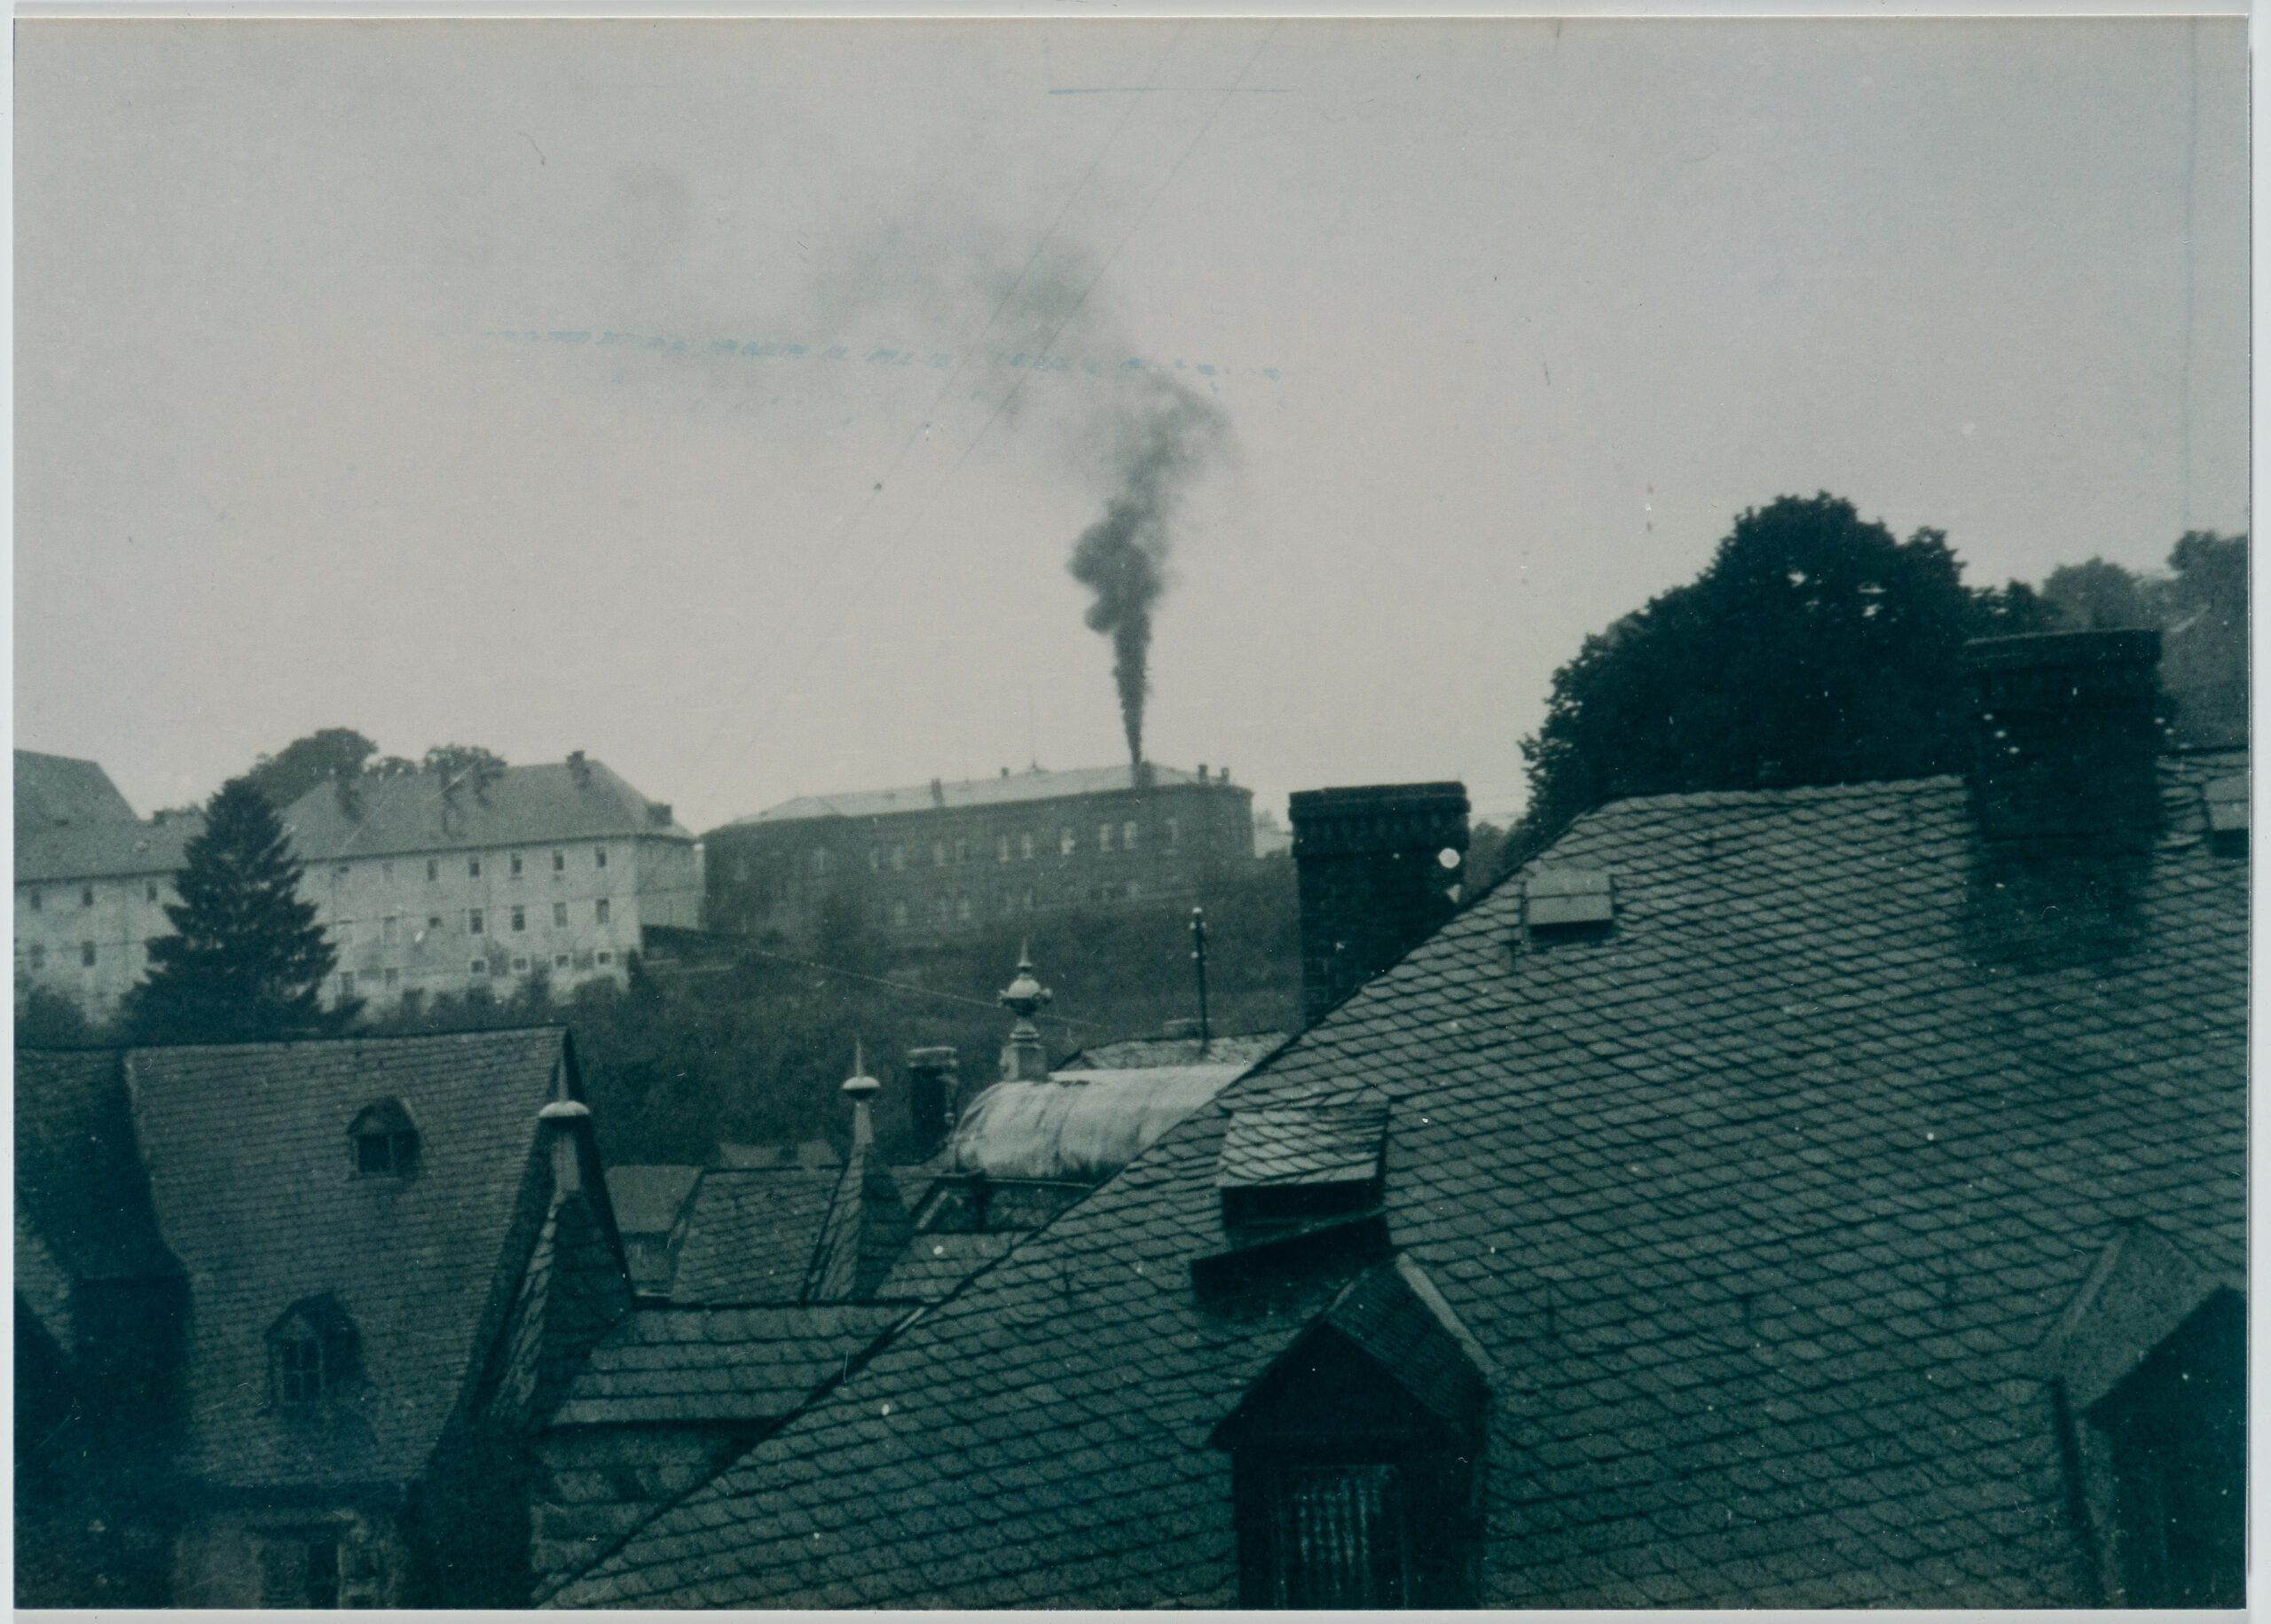 Black and white photo of the Hadamar institution from afar. In the foreground are the roofs of several buildings in Hadamar. A black smoke column is rising into the sky from the chimney of the institution.